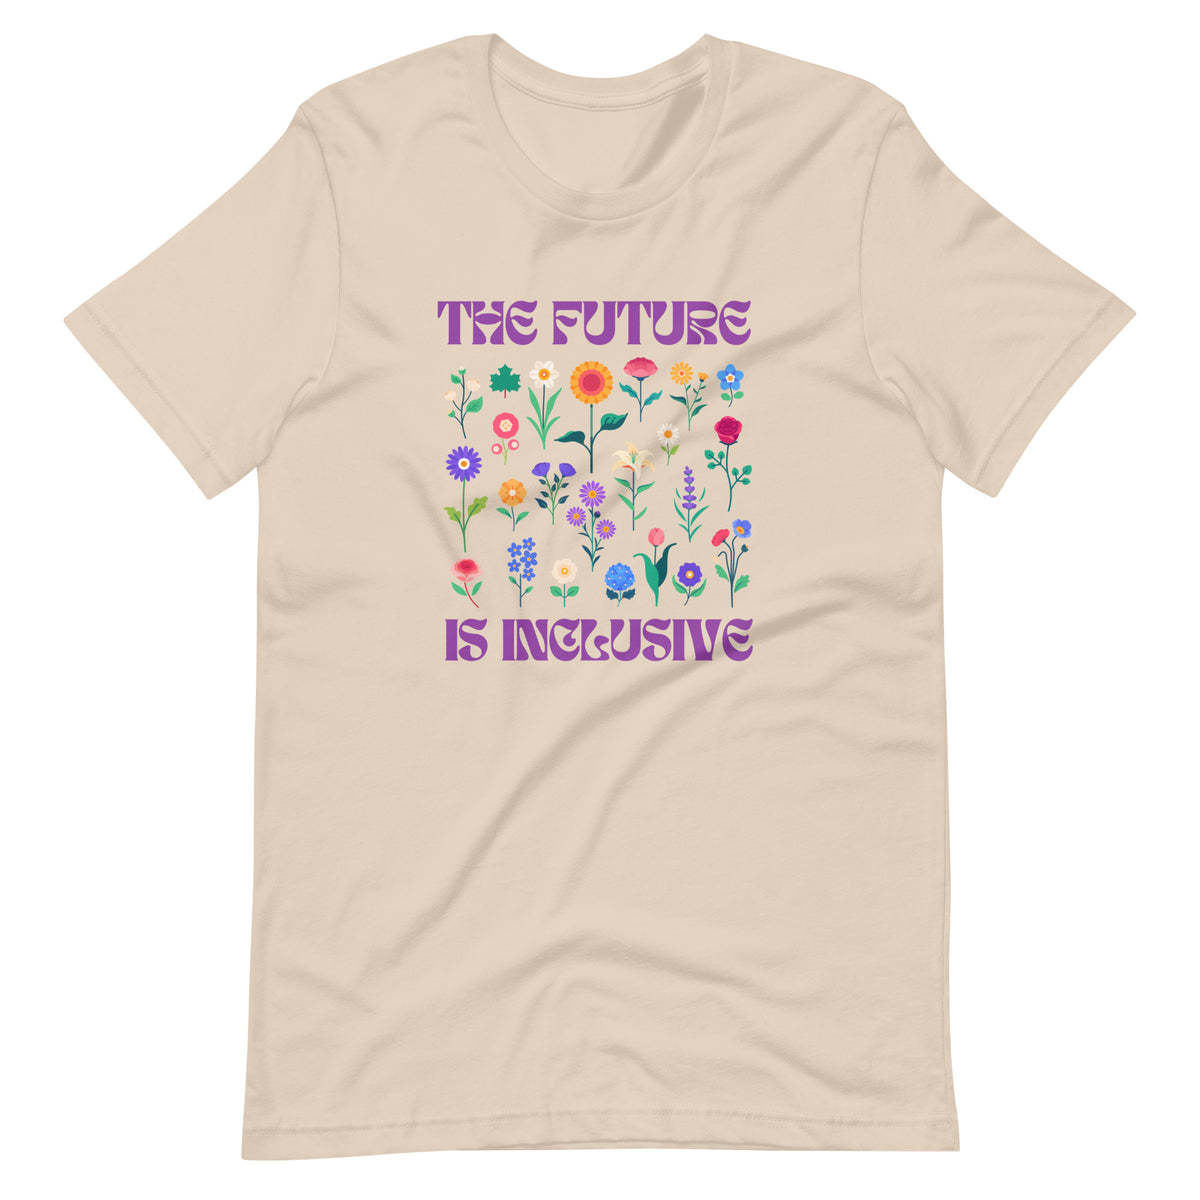 The Future is Inclusive T-Shirt